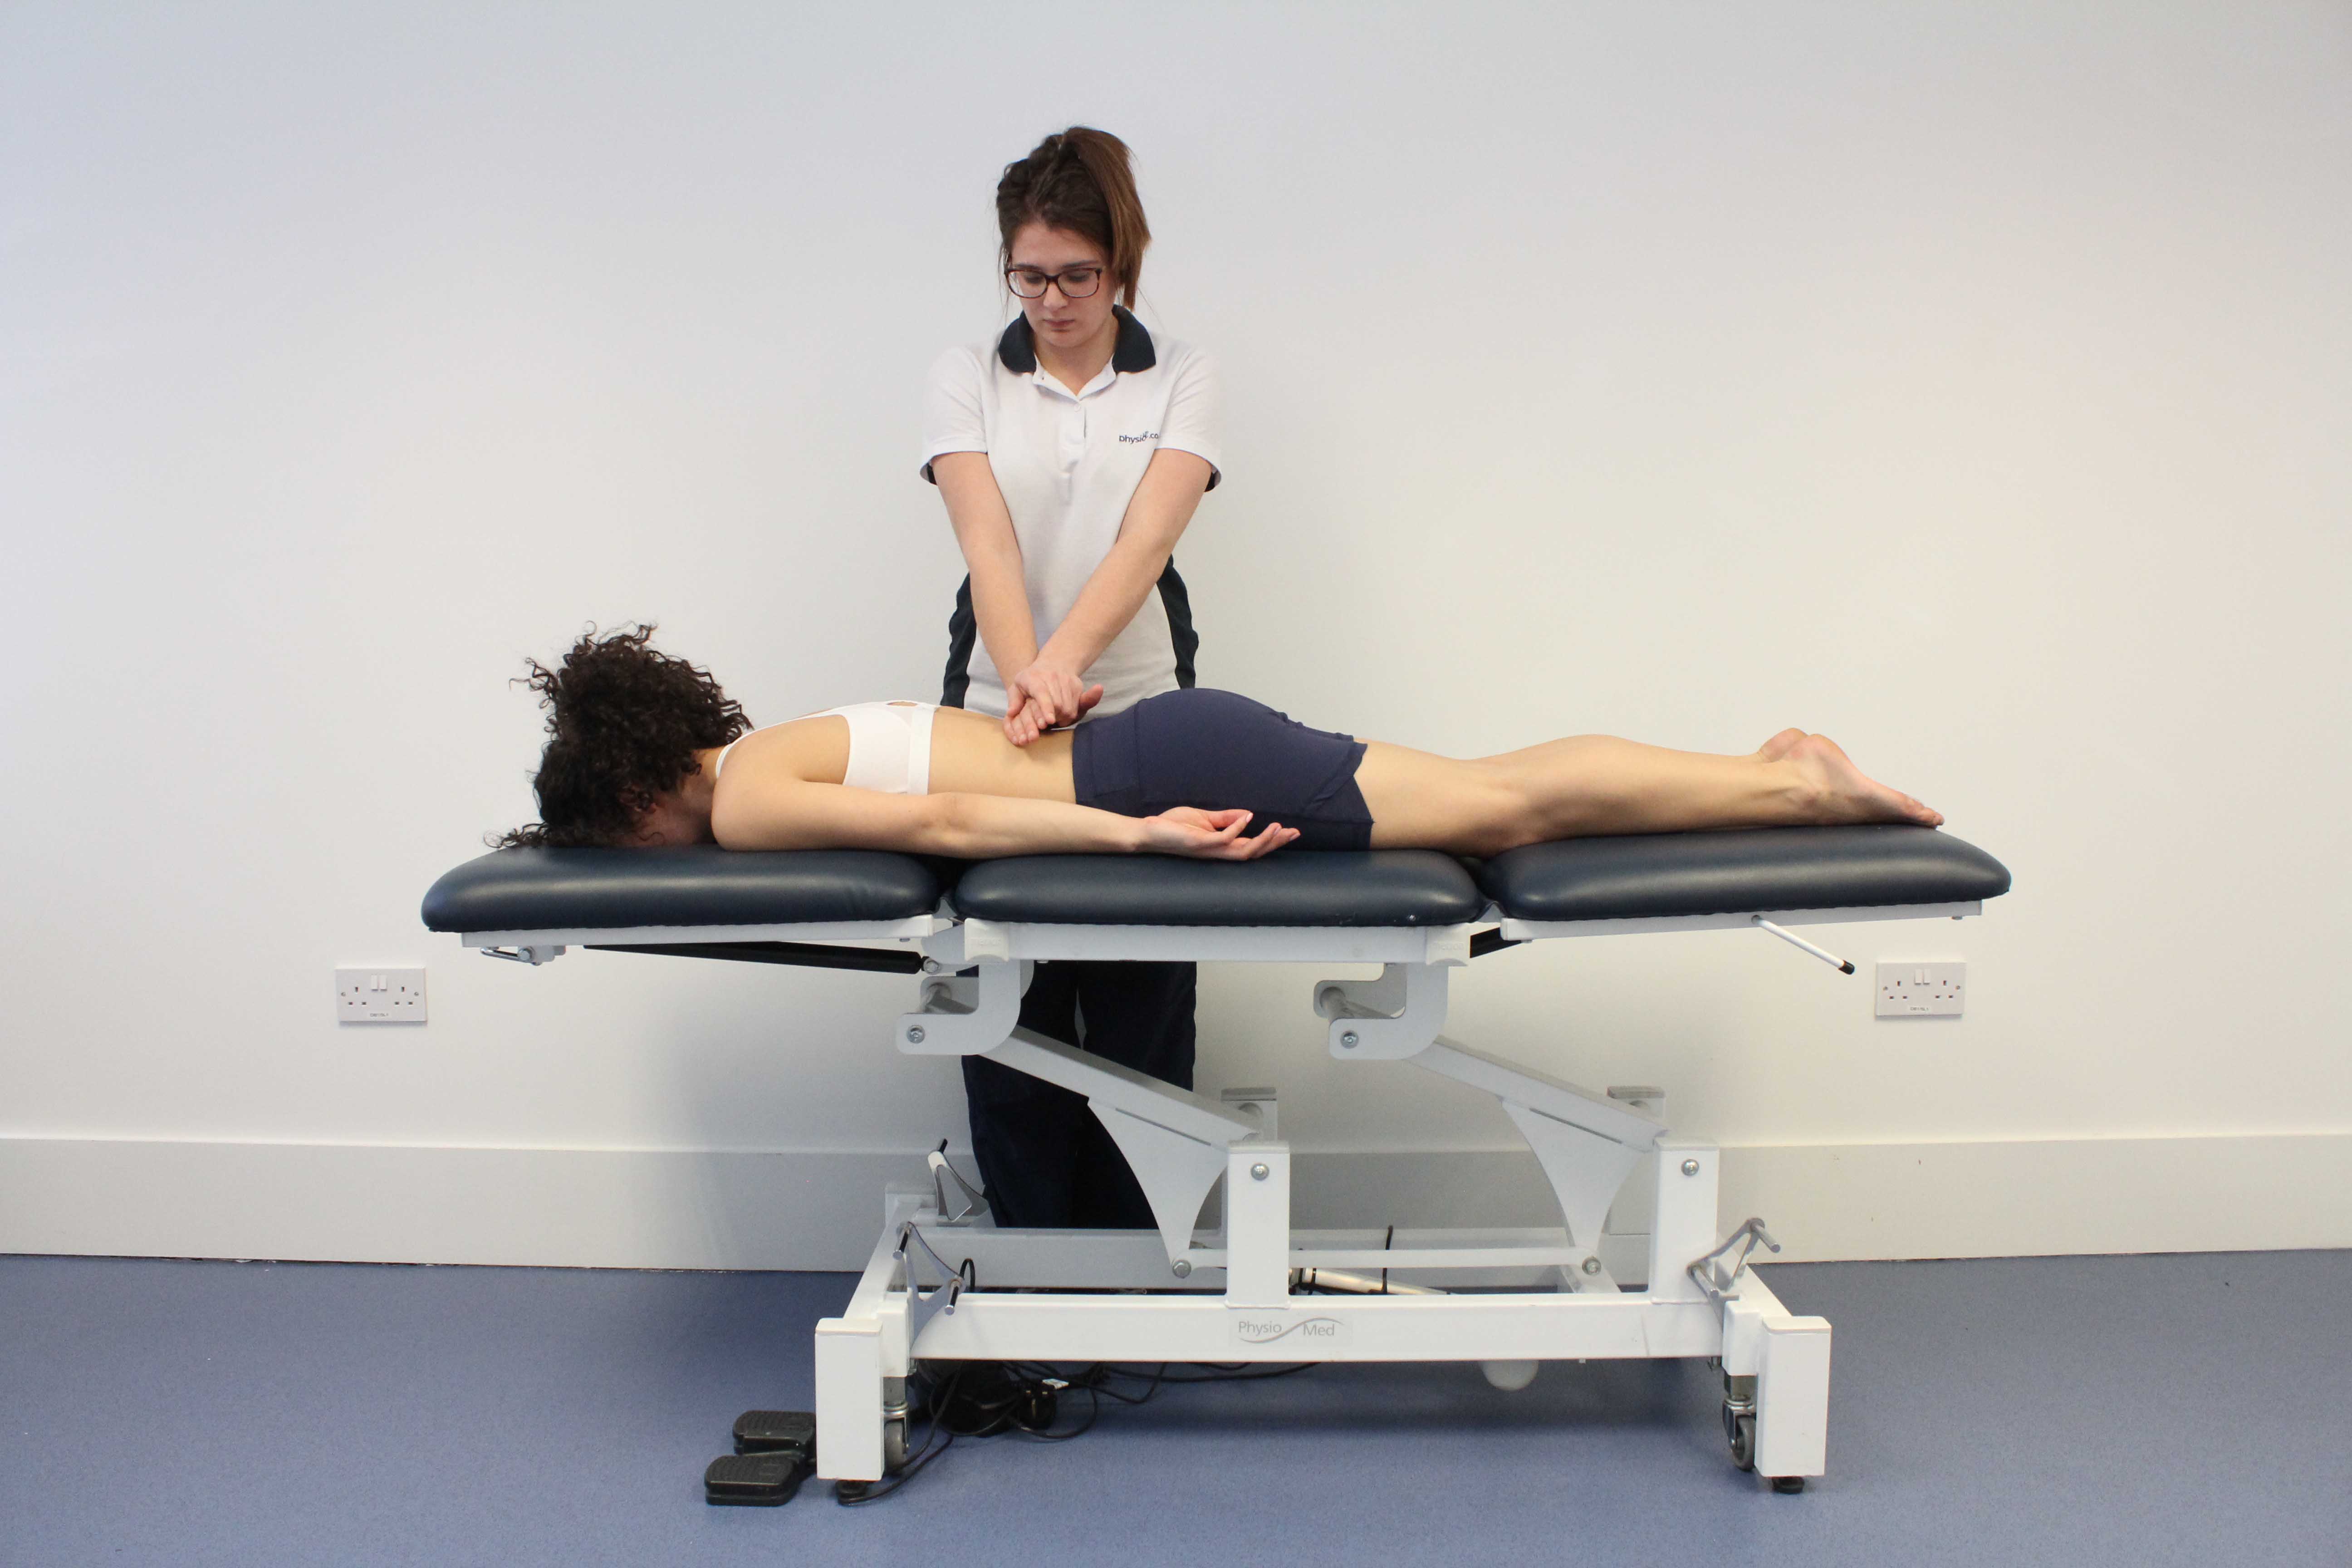 Mobilisations of the vertebrea in the lower back by a physiotherapist